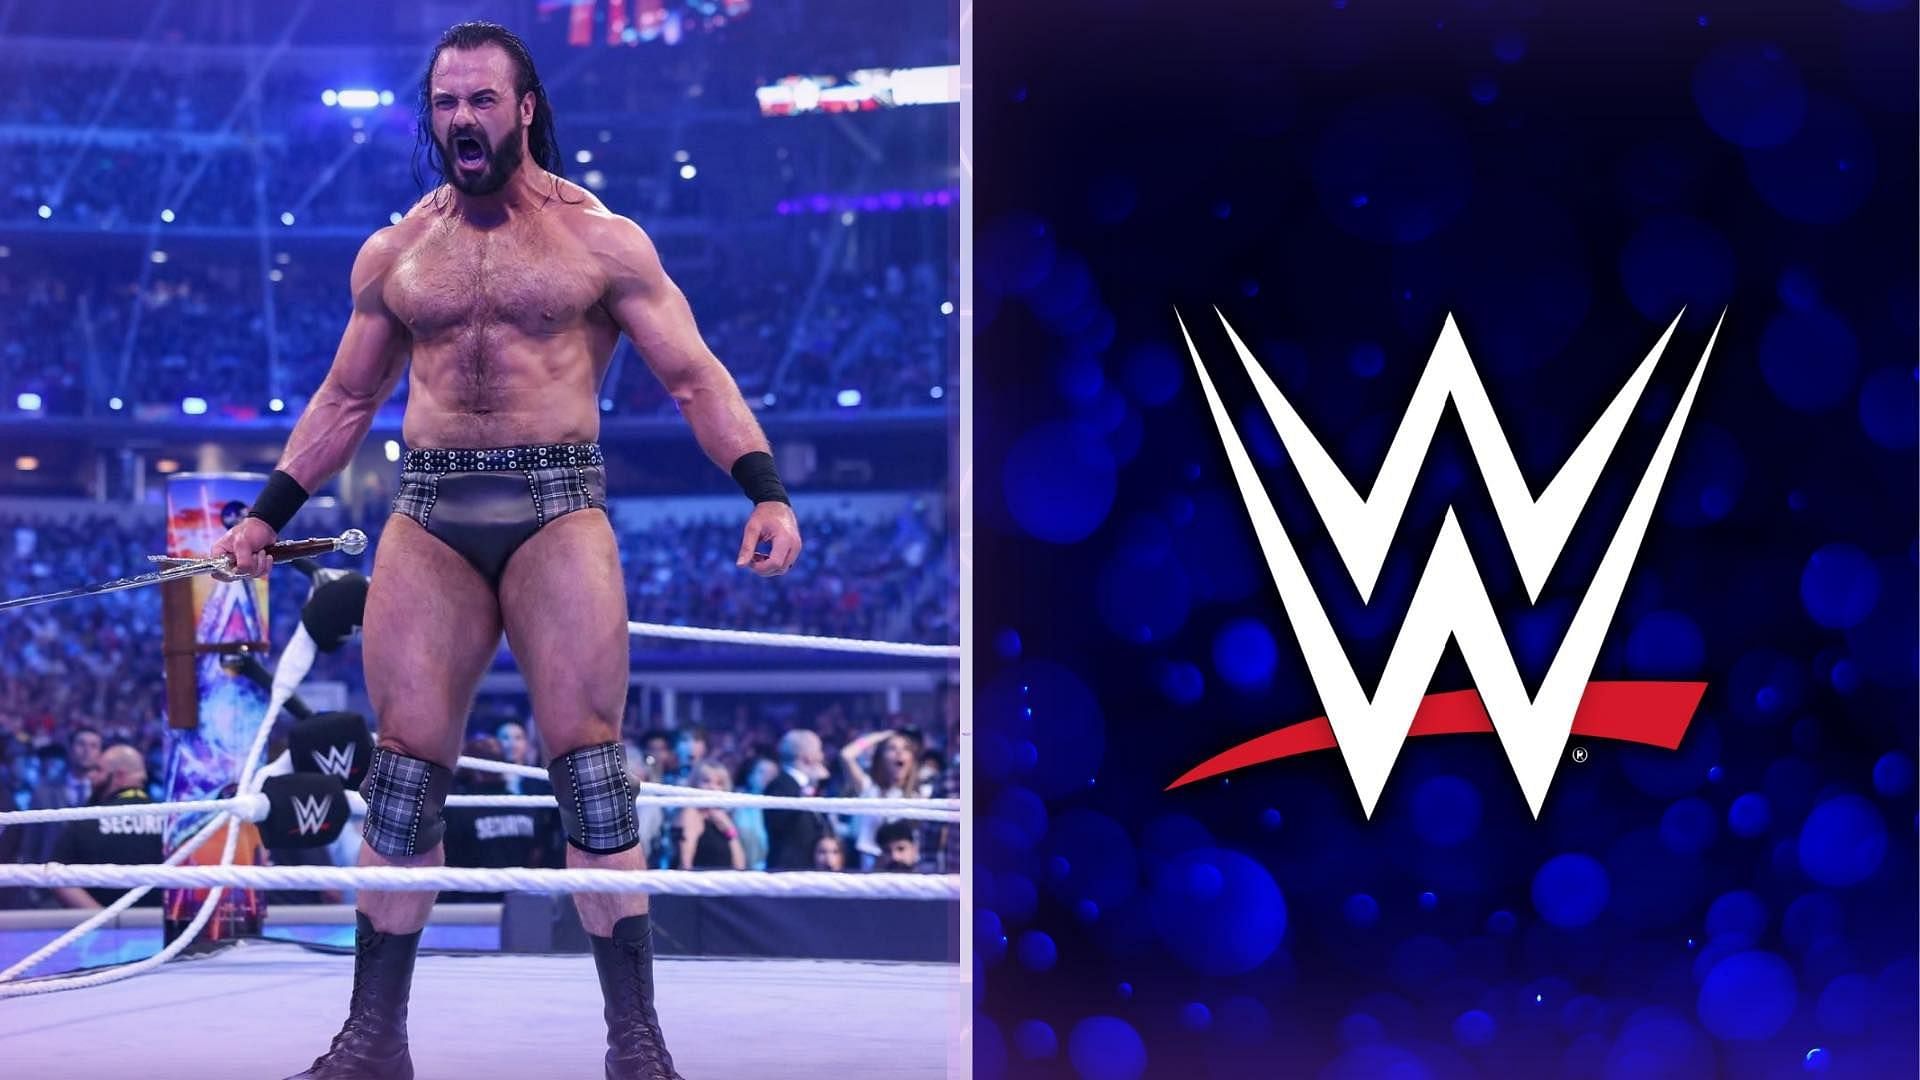 Drew McIntyre will try to win the World Heavyweight title at RAW Day 1.